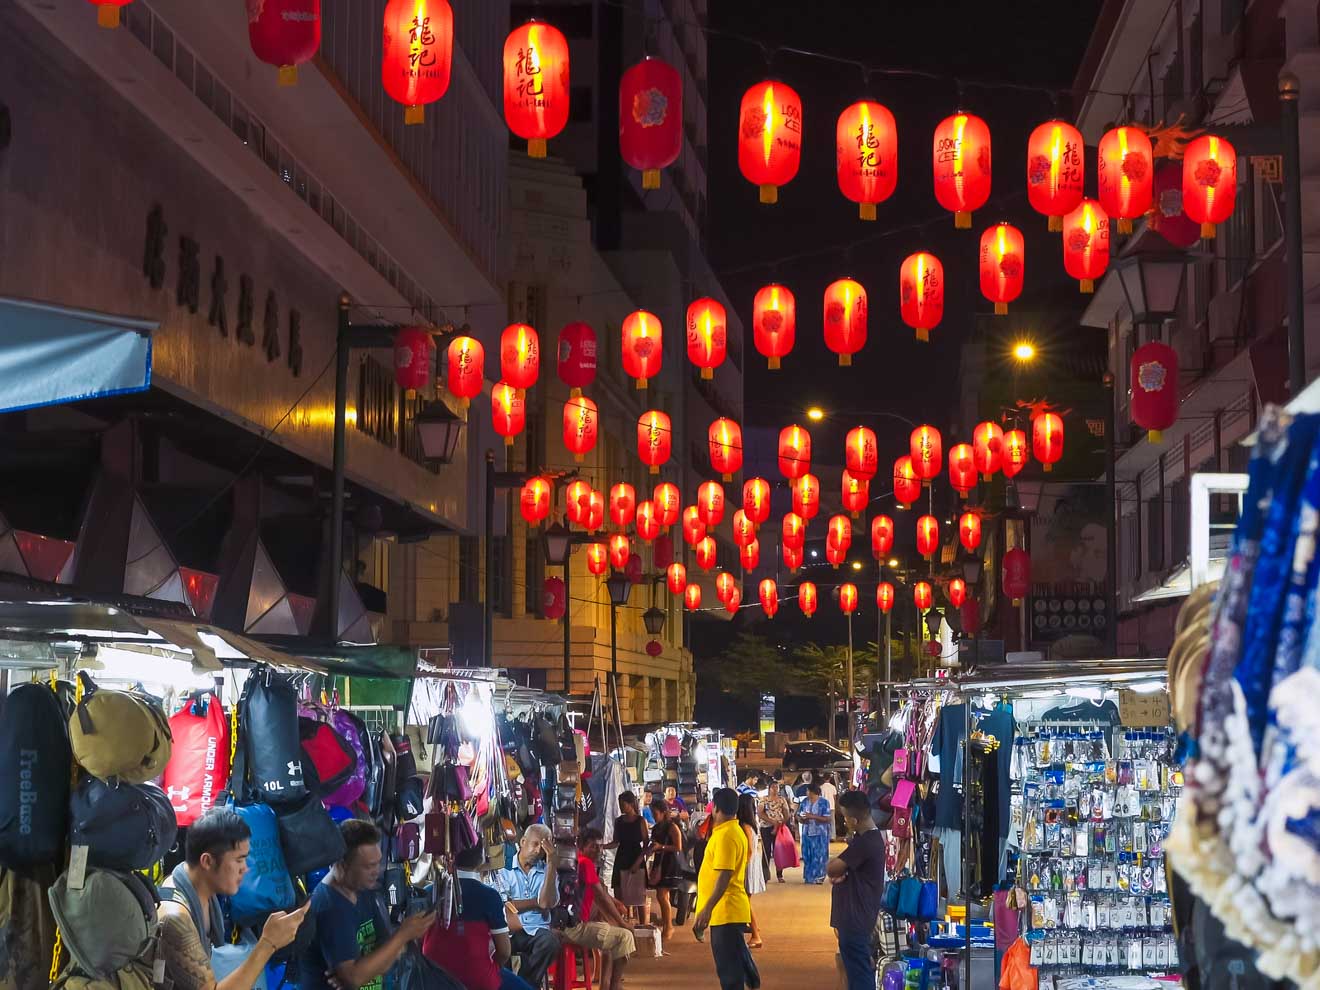 Bustling night market scene under a canopy of glowing red lanterns with vendors selling various goods and people milling about in a lively street in Chinatown